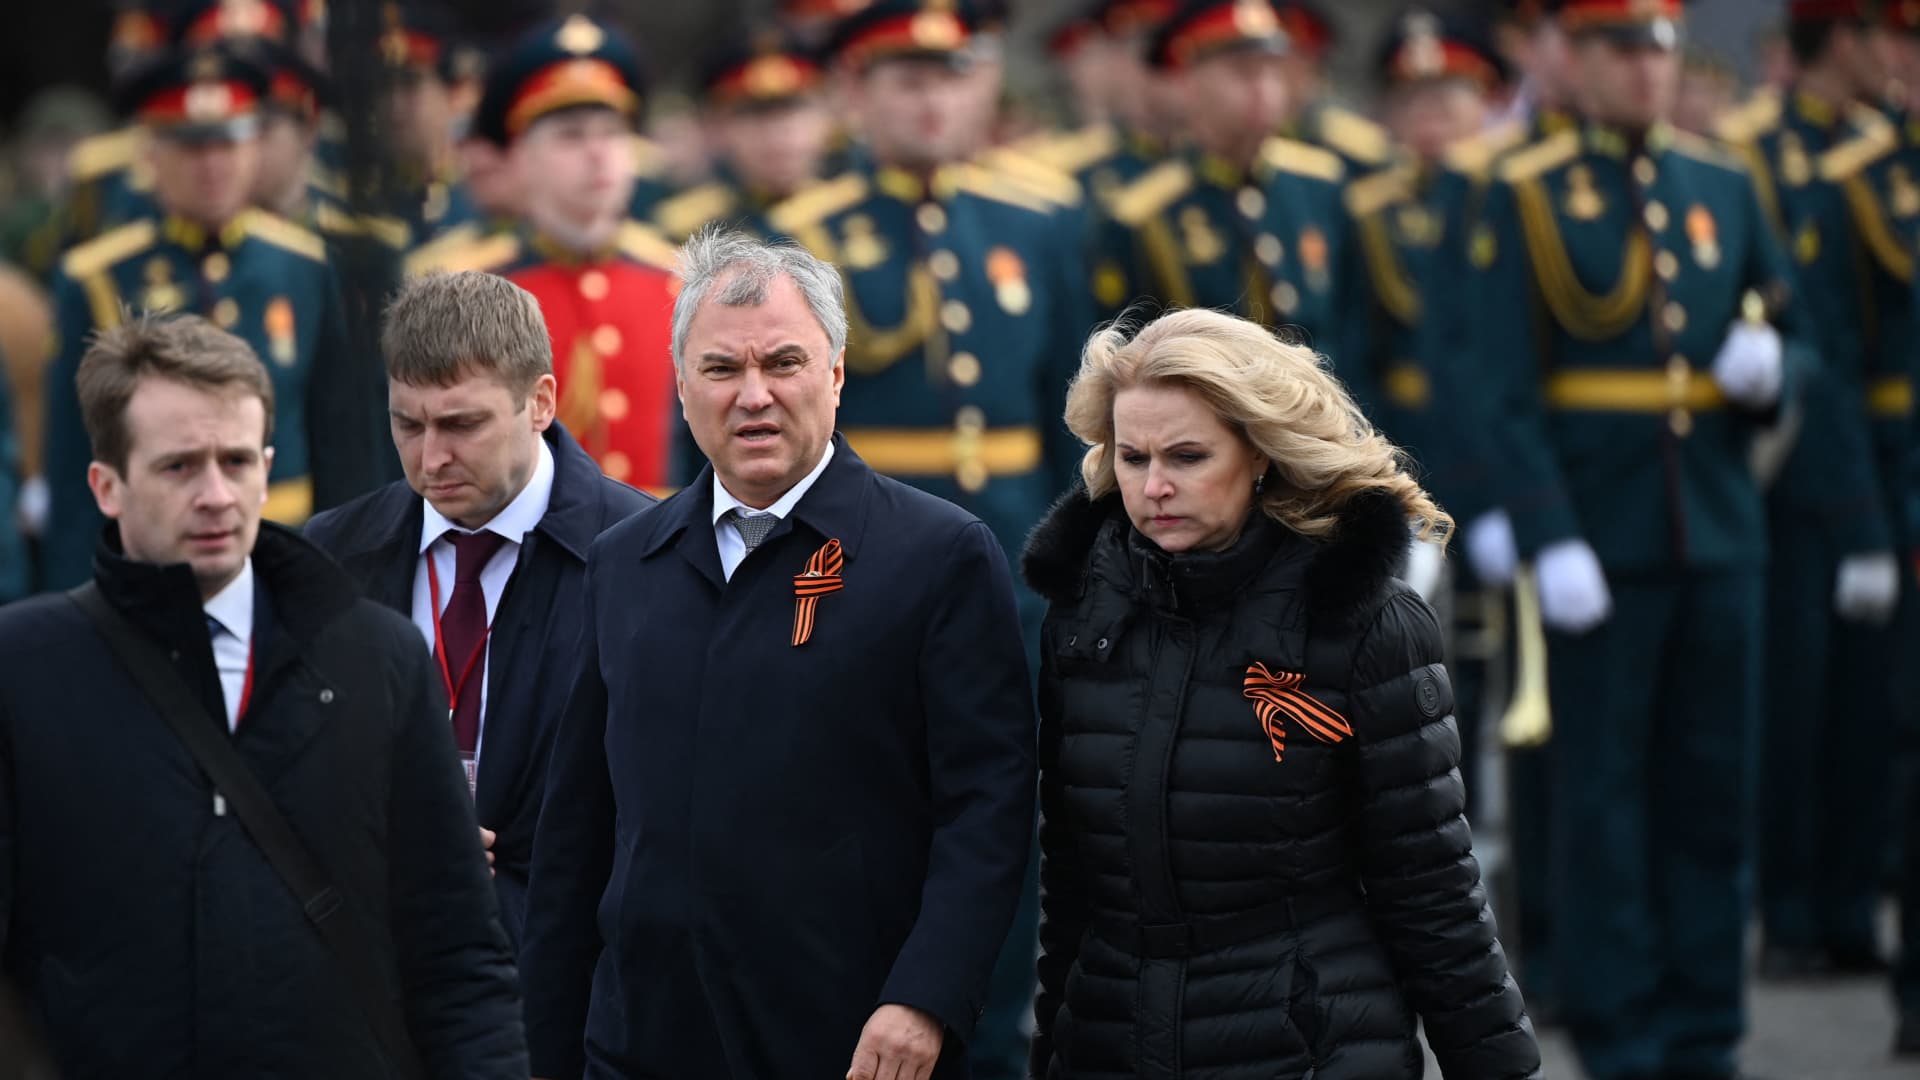 Speaker of Russia's lower house of parliament, the State Duma, Vyachslav Volodin and Deputy Prime Minister Tatyana Golikova arrive to watch the Victory Day military parade at Red Square in central Moscow on May 9, 2022. - Russia celebrates the 77th anniversary of the victory over Nazi Germany during World War II. (Photo by Kirill KUDRYAVTSEV / AFP) (Photo by KIRILL KUDRYAVTSEV/AFP via Getty Images)